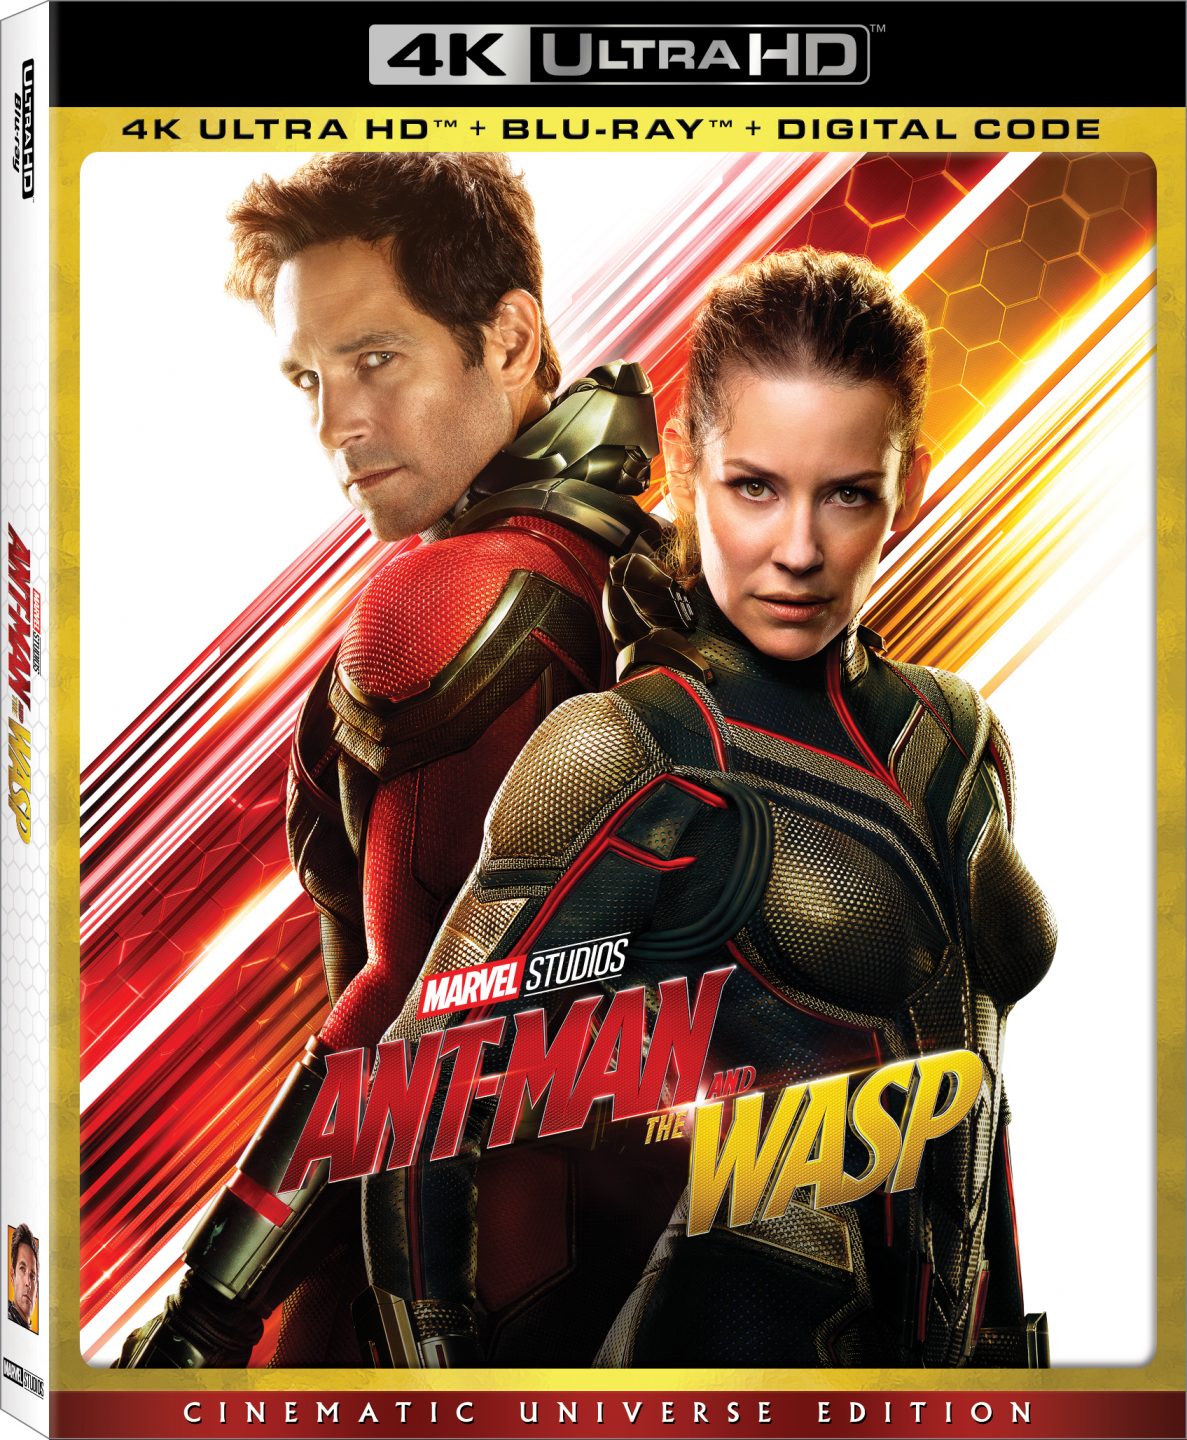 Ant-Man And The Wasp 4K Ultra HD Combo Pack cover (Walt Disney Studios Home Entertainment)